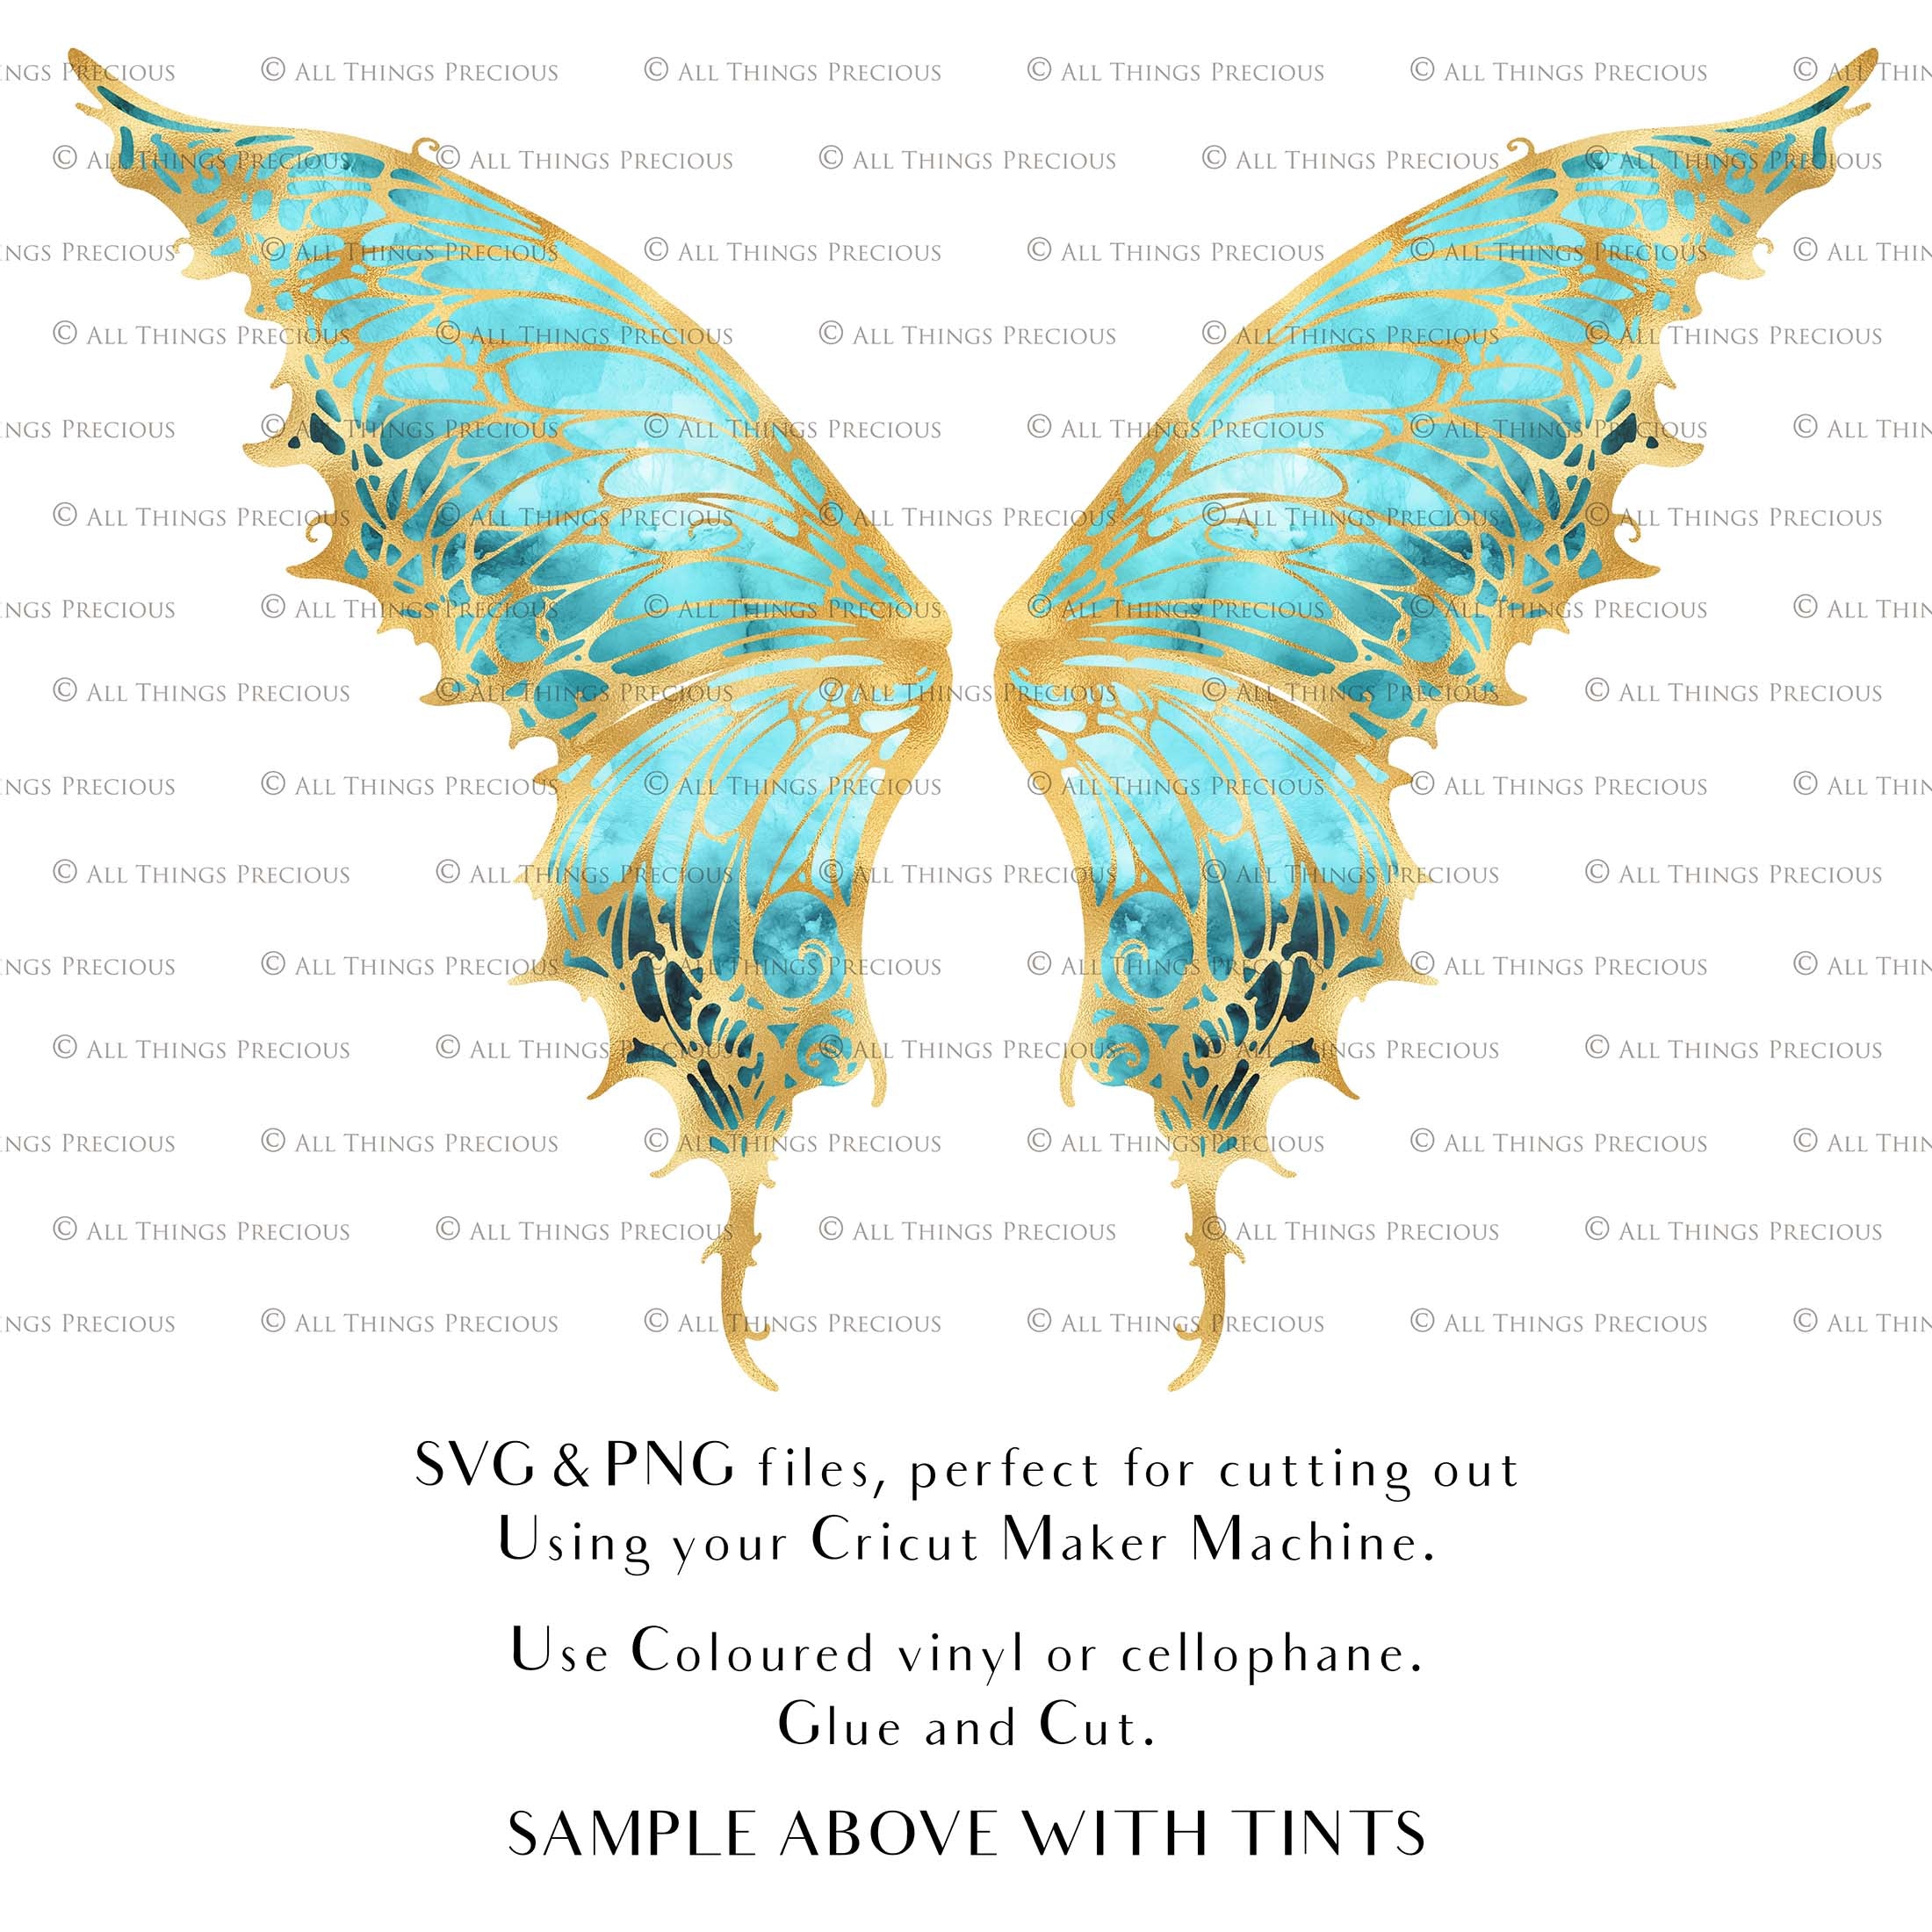 SVG, PNG Clipart, Fairy Wings, for Cricut and Silhouette Machine. Cut out and make your own real fairy wings. For Costumes, Halloween, Cosplay Wings, Adult Wings, Child size wings. Use them for Wedding invitations, sublimation print or decorations.